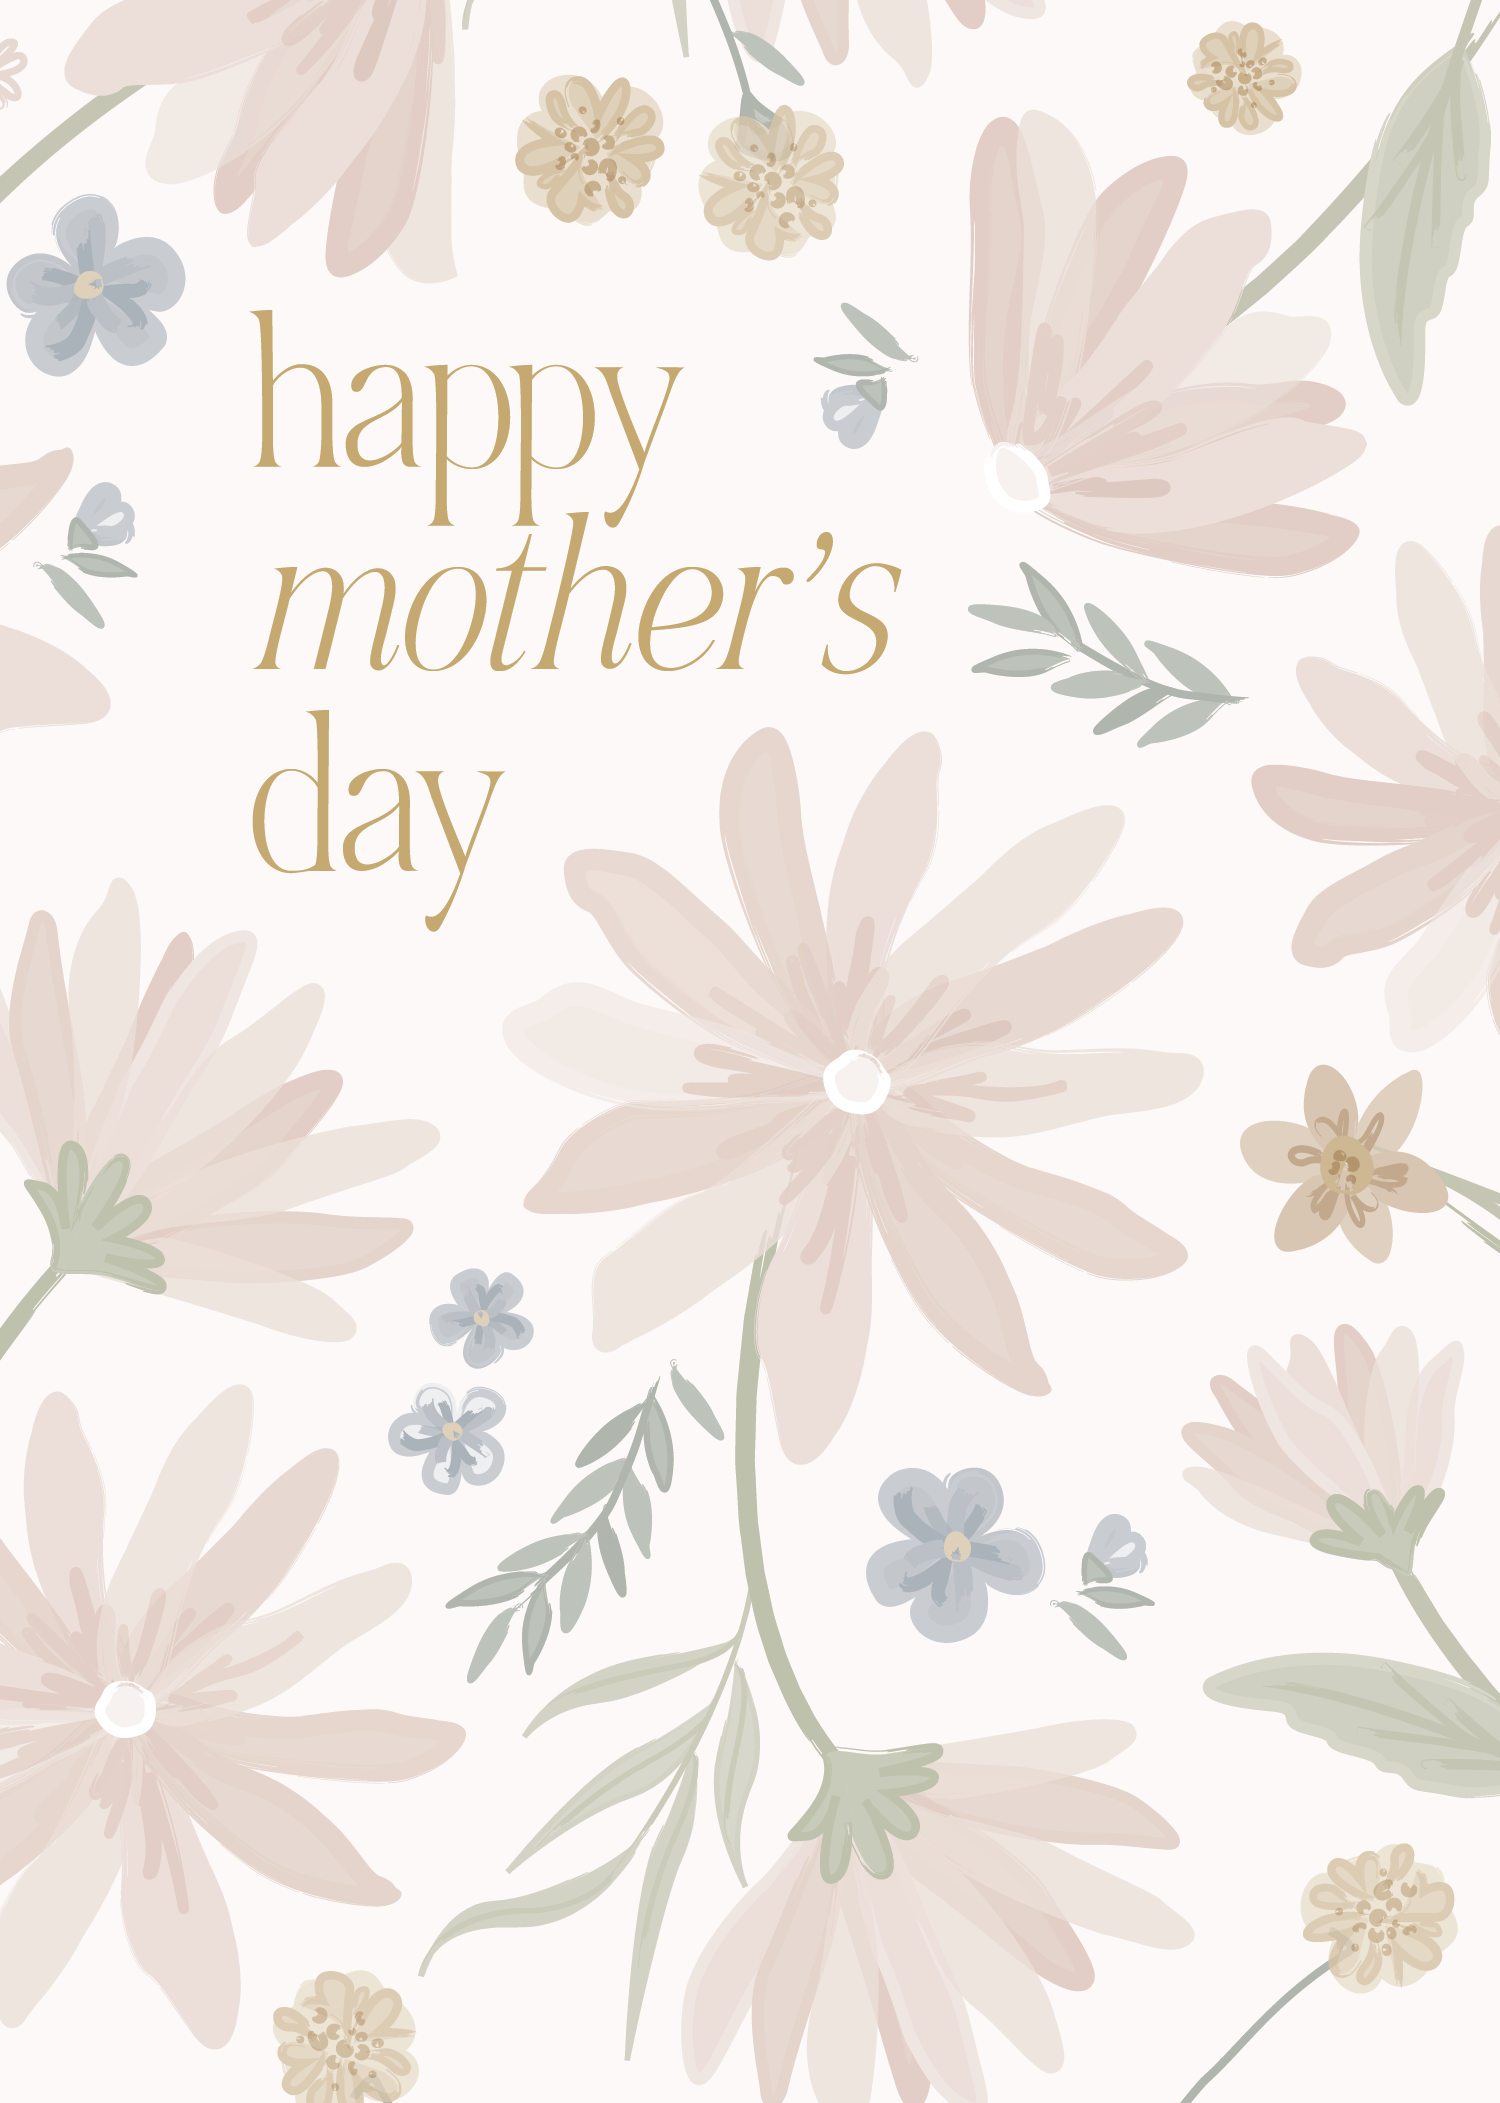 Greeting Card Blushing Floral- Happy Mothers Day